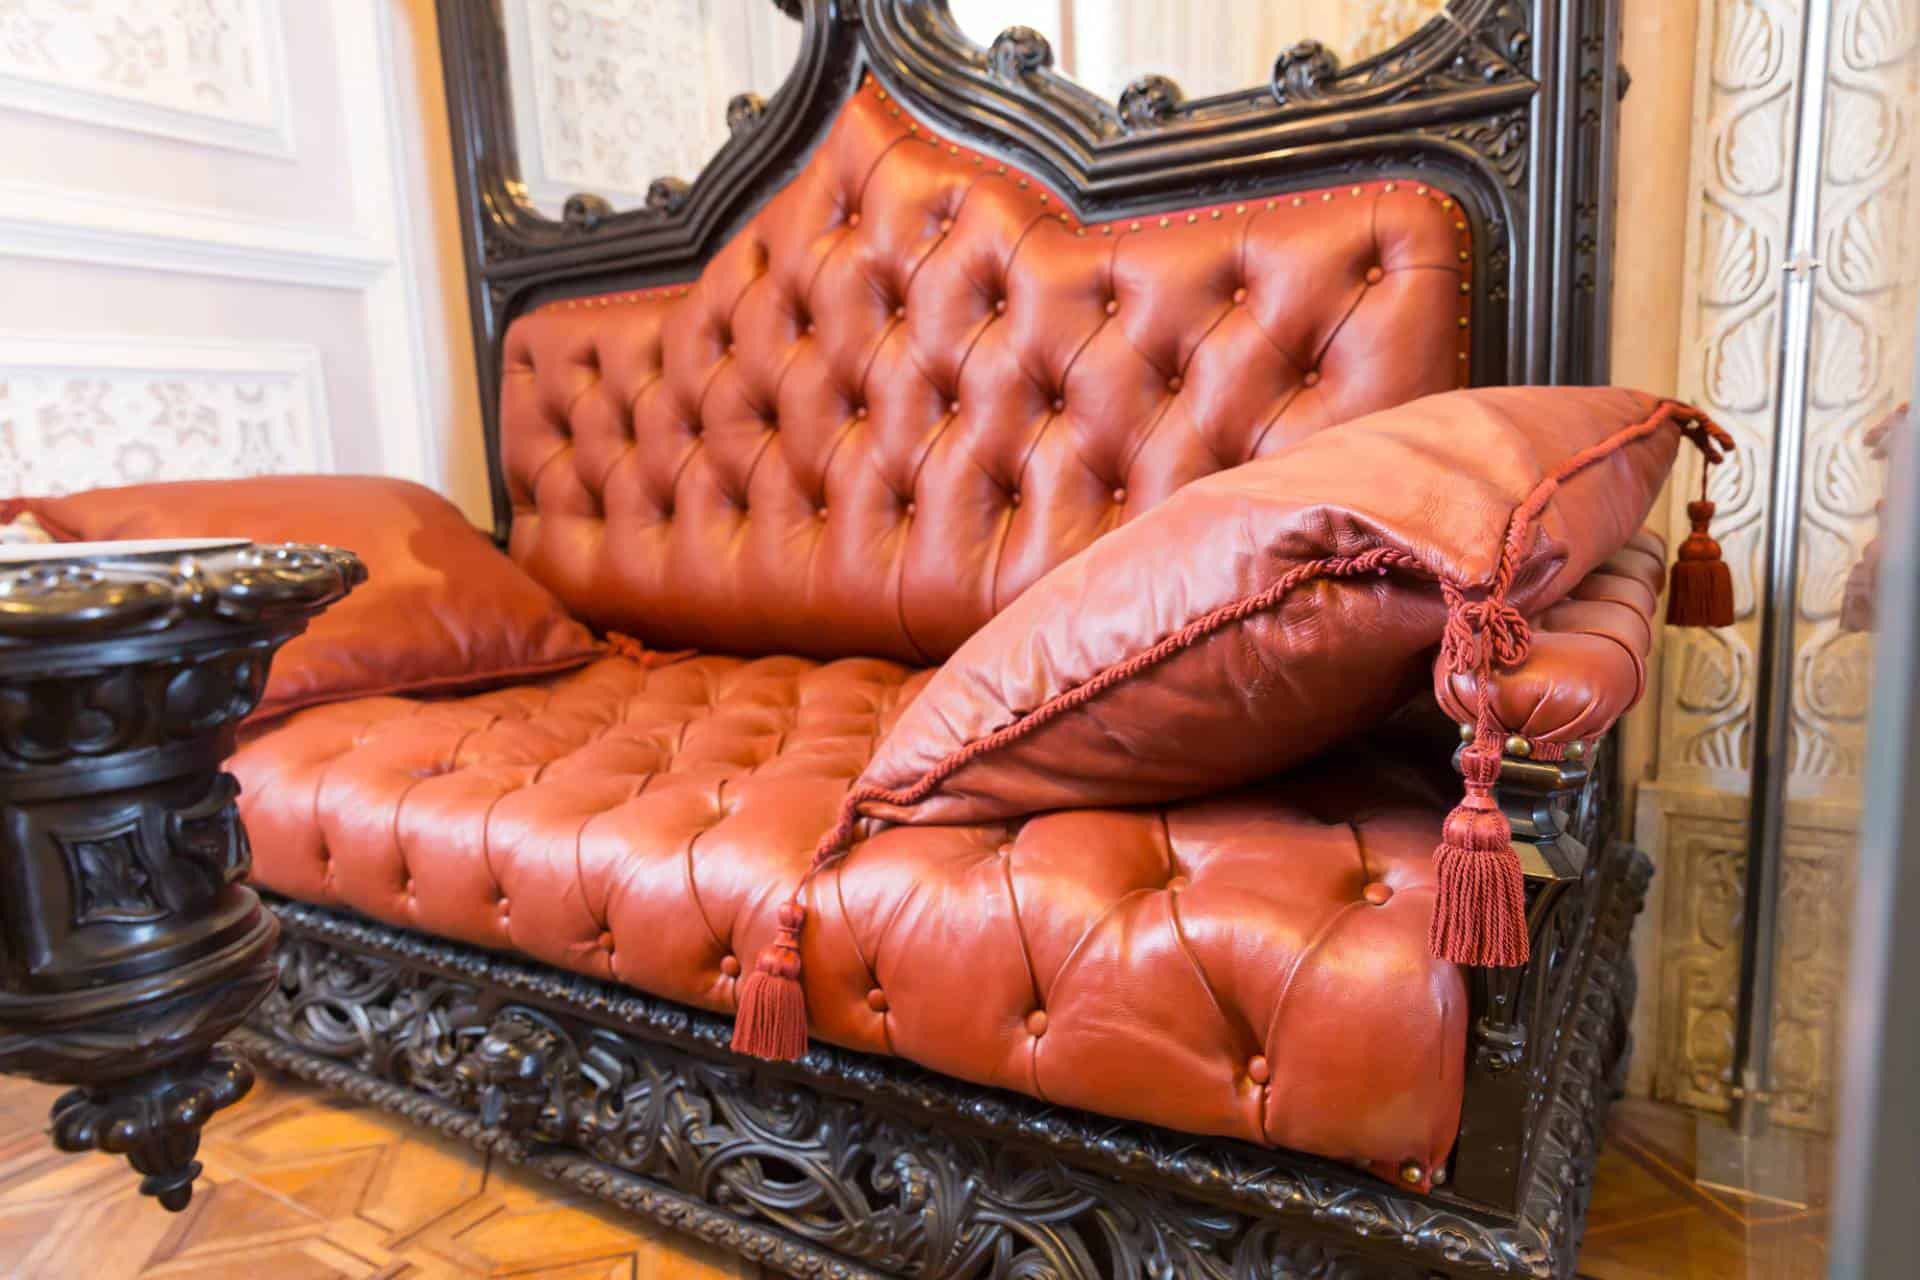 What ever became of Sigmund Freud’s couch?